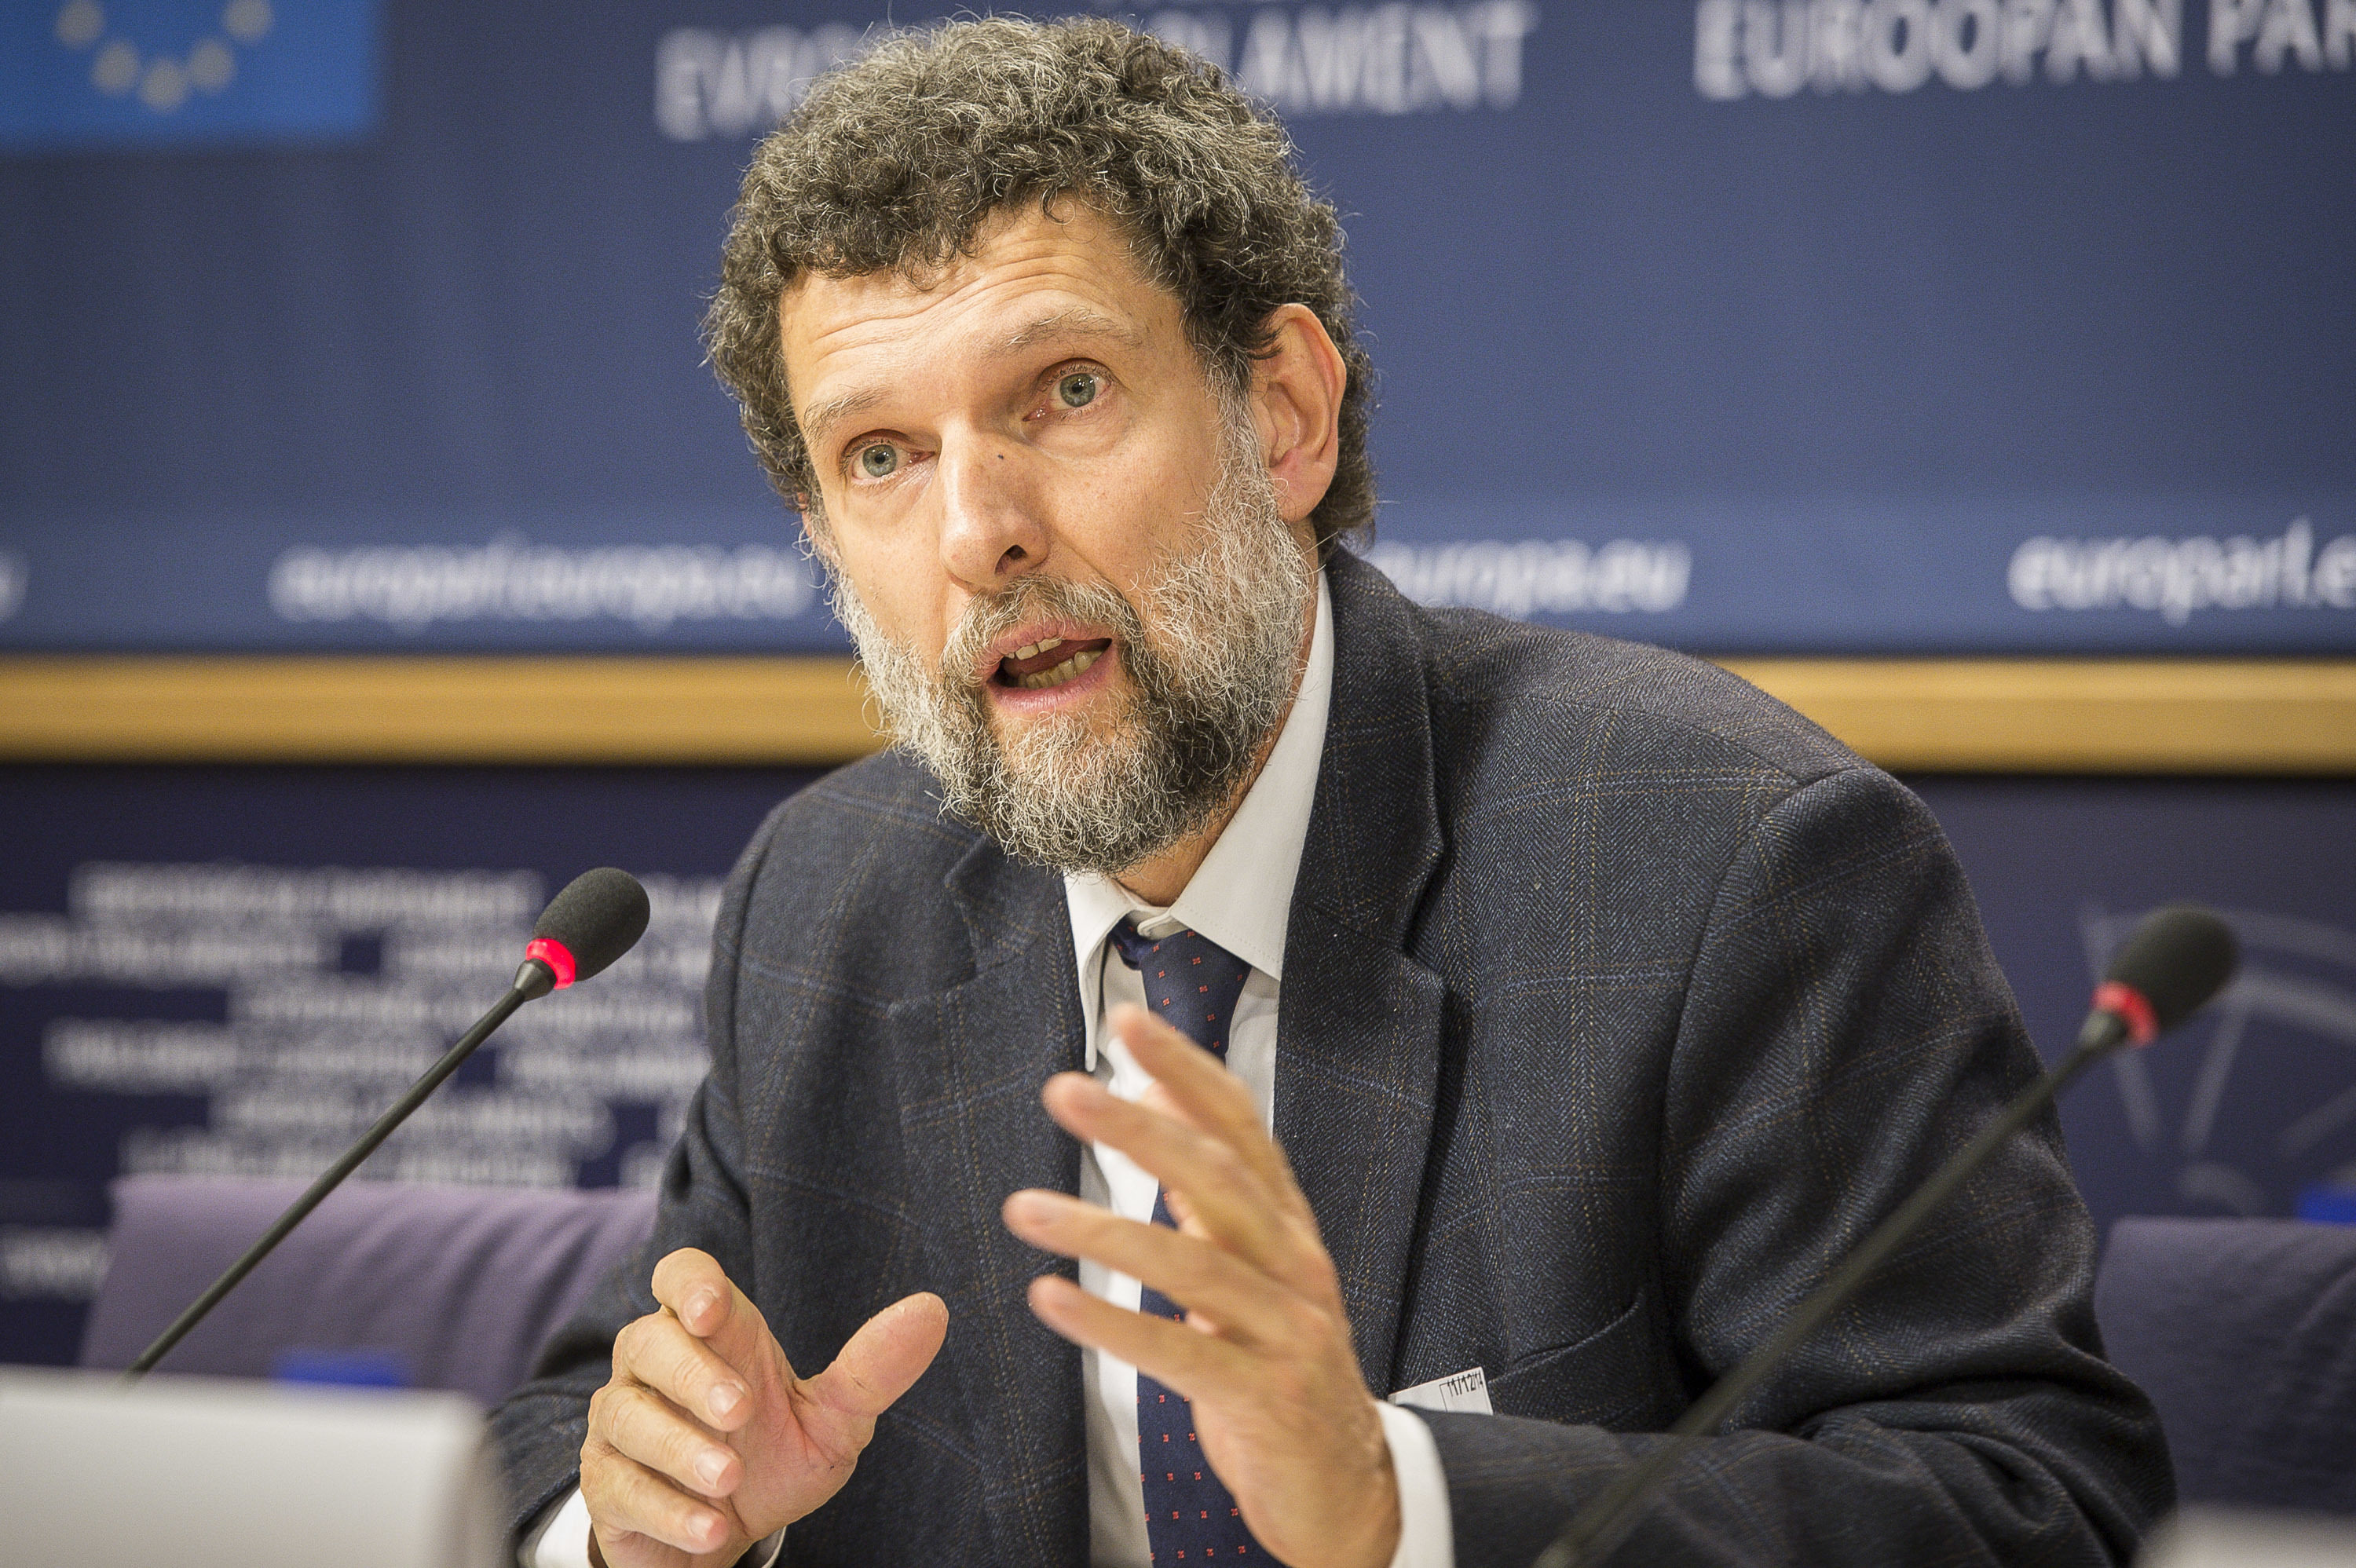 Jailed Turkish philanthropist Osman Kavala, seen here in 2014, was awarded the European Council’s top rights prize on Monday. Photo: dpa